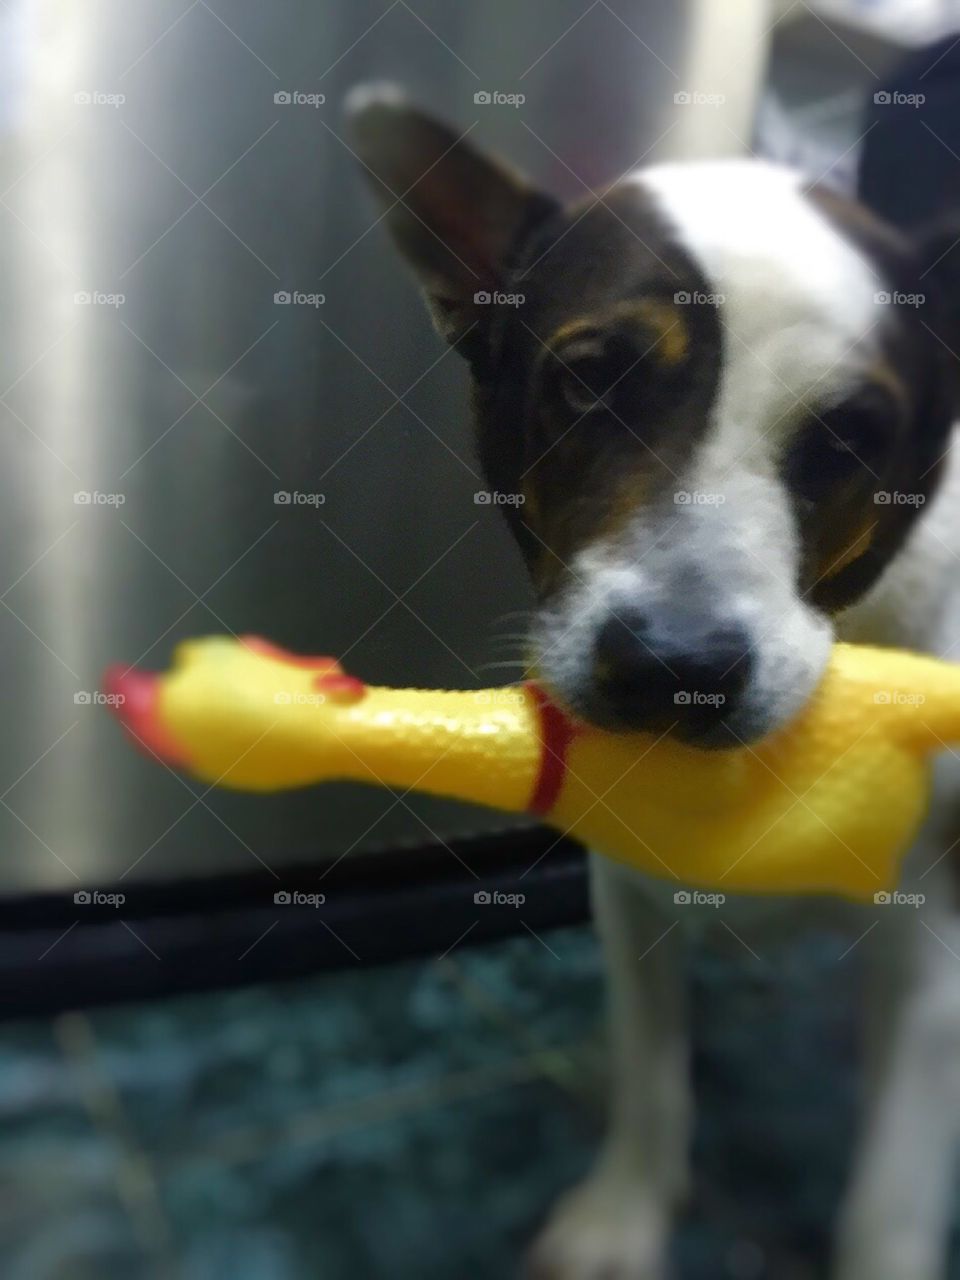 My dog's toy. This is the most favorite toy of him ^^